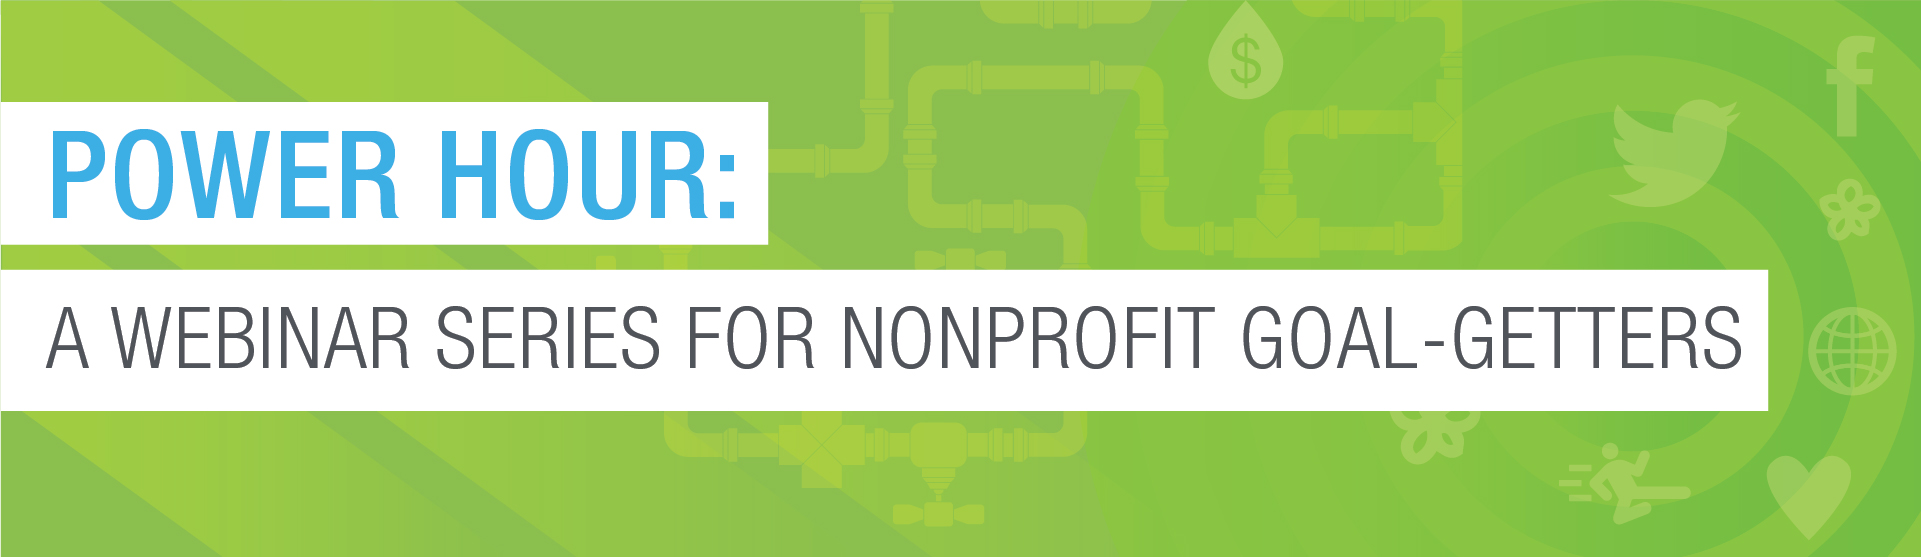 Power Hour: A Webinar Series For Nonprofit Goal-Getters